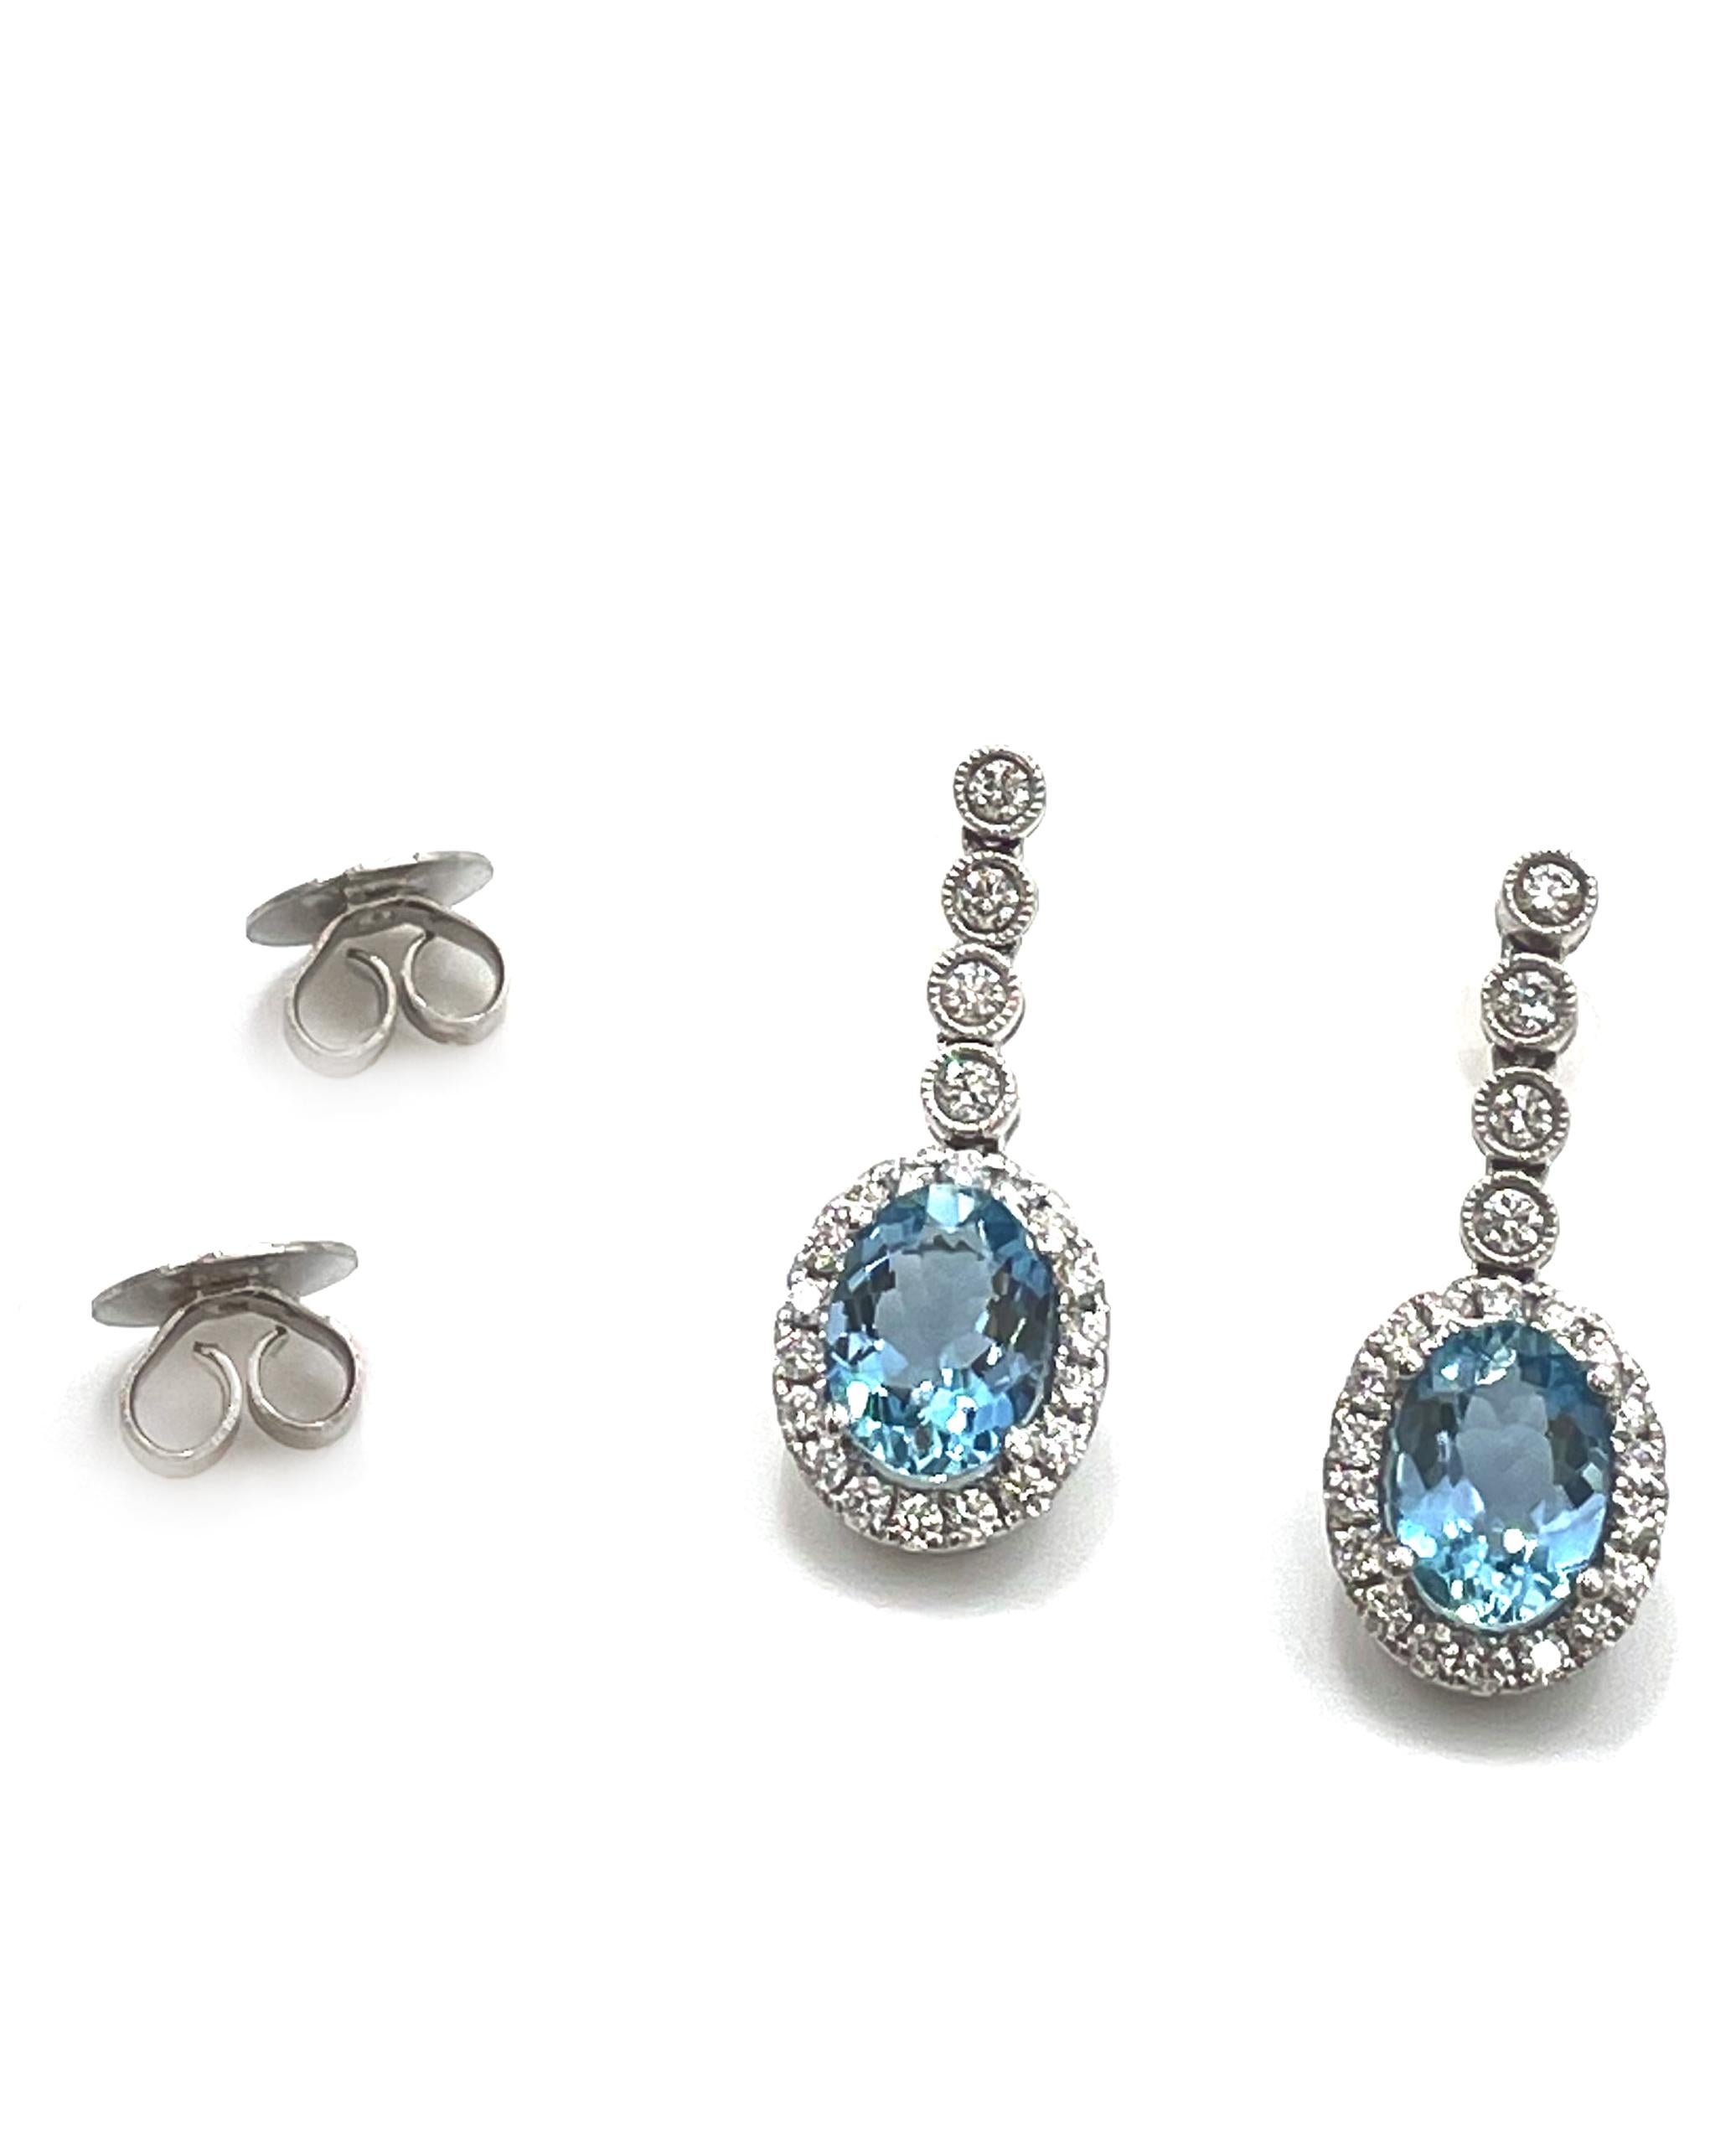 Contemporary 18K White Gold Drop Halo Earrings with Aquamarines and Diamonds For Sale